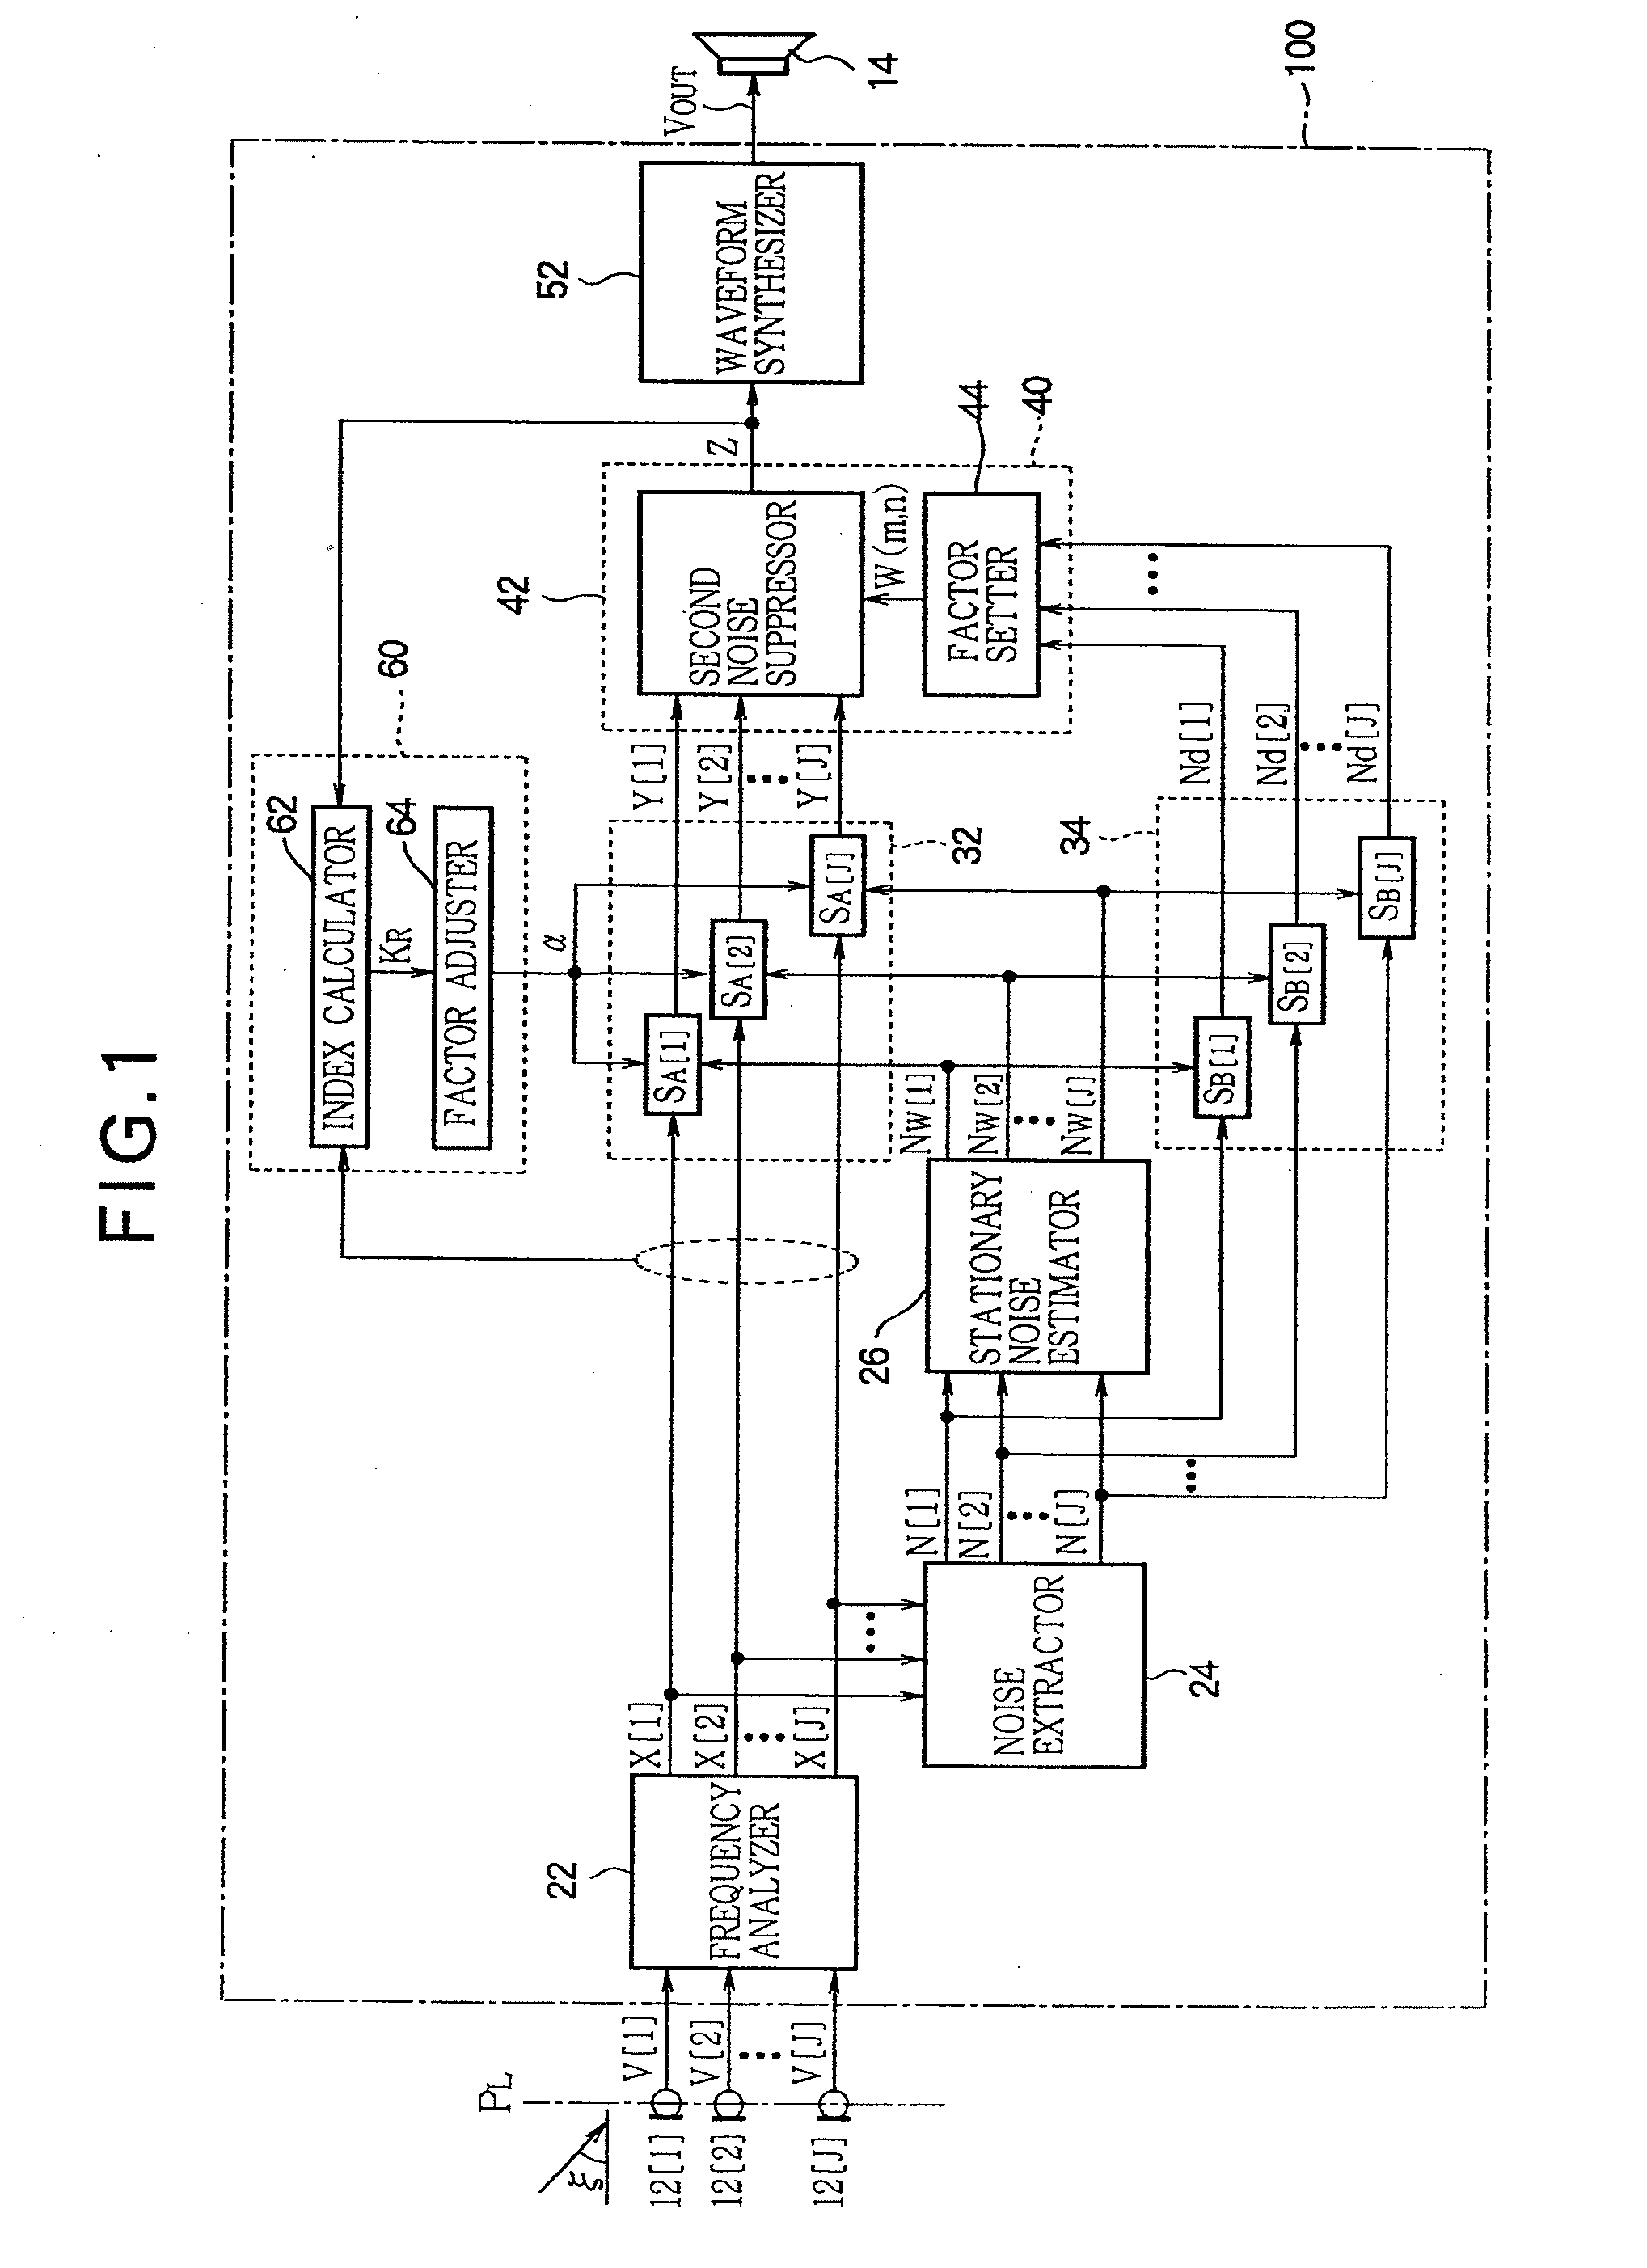 Noise suppression apparatus and program